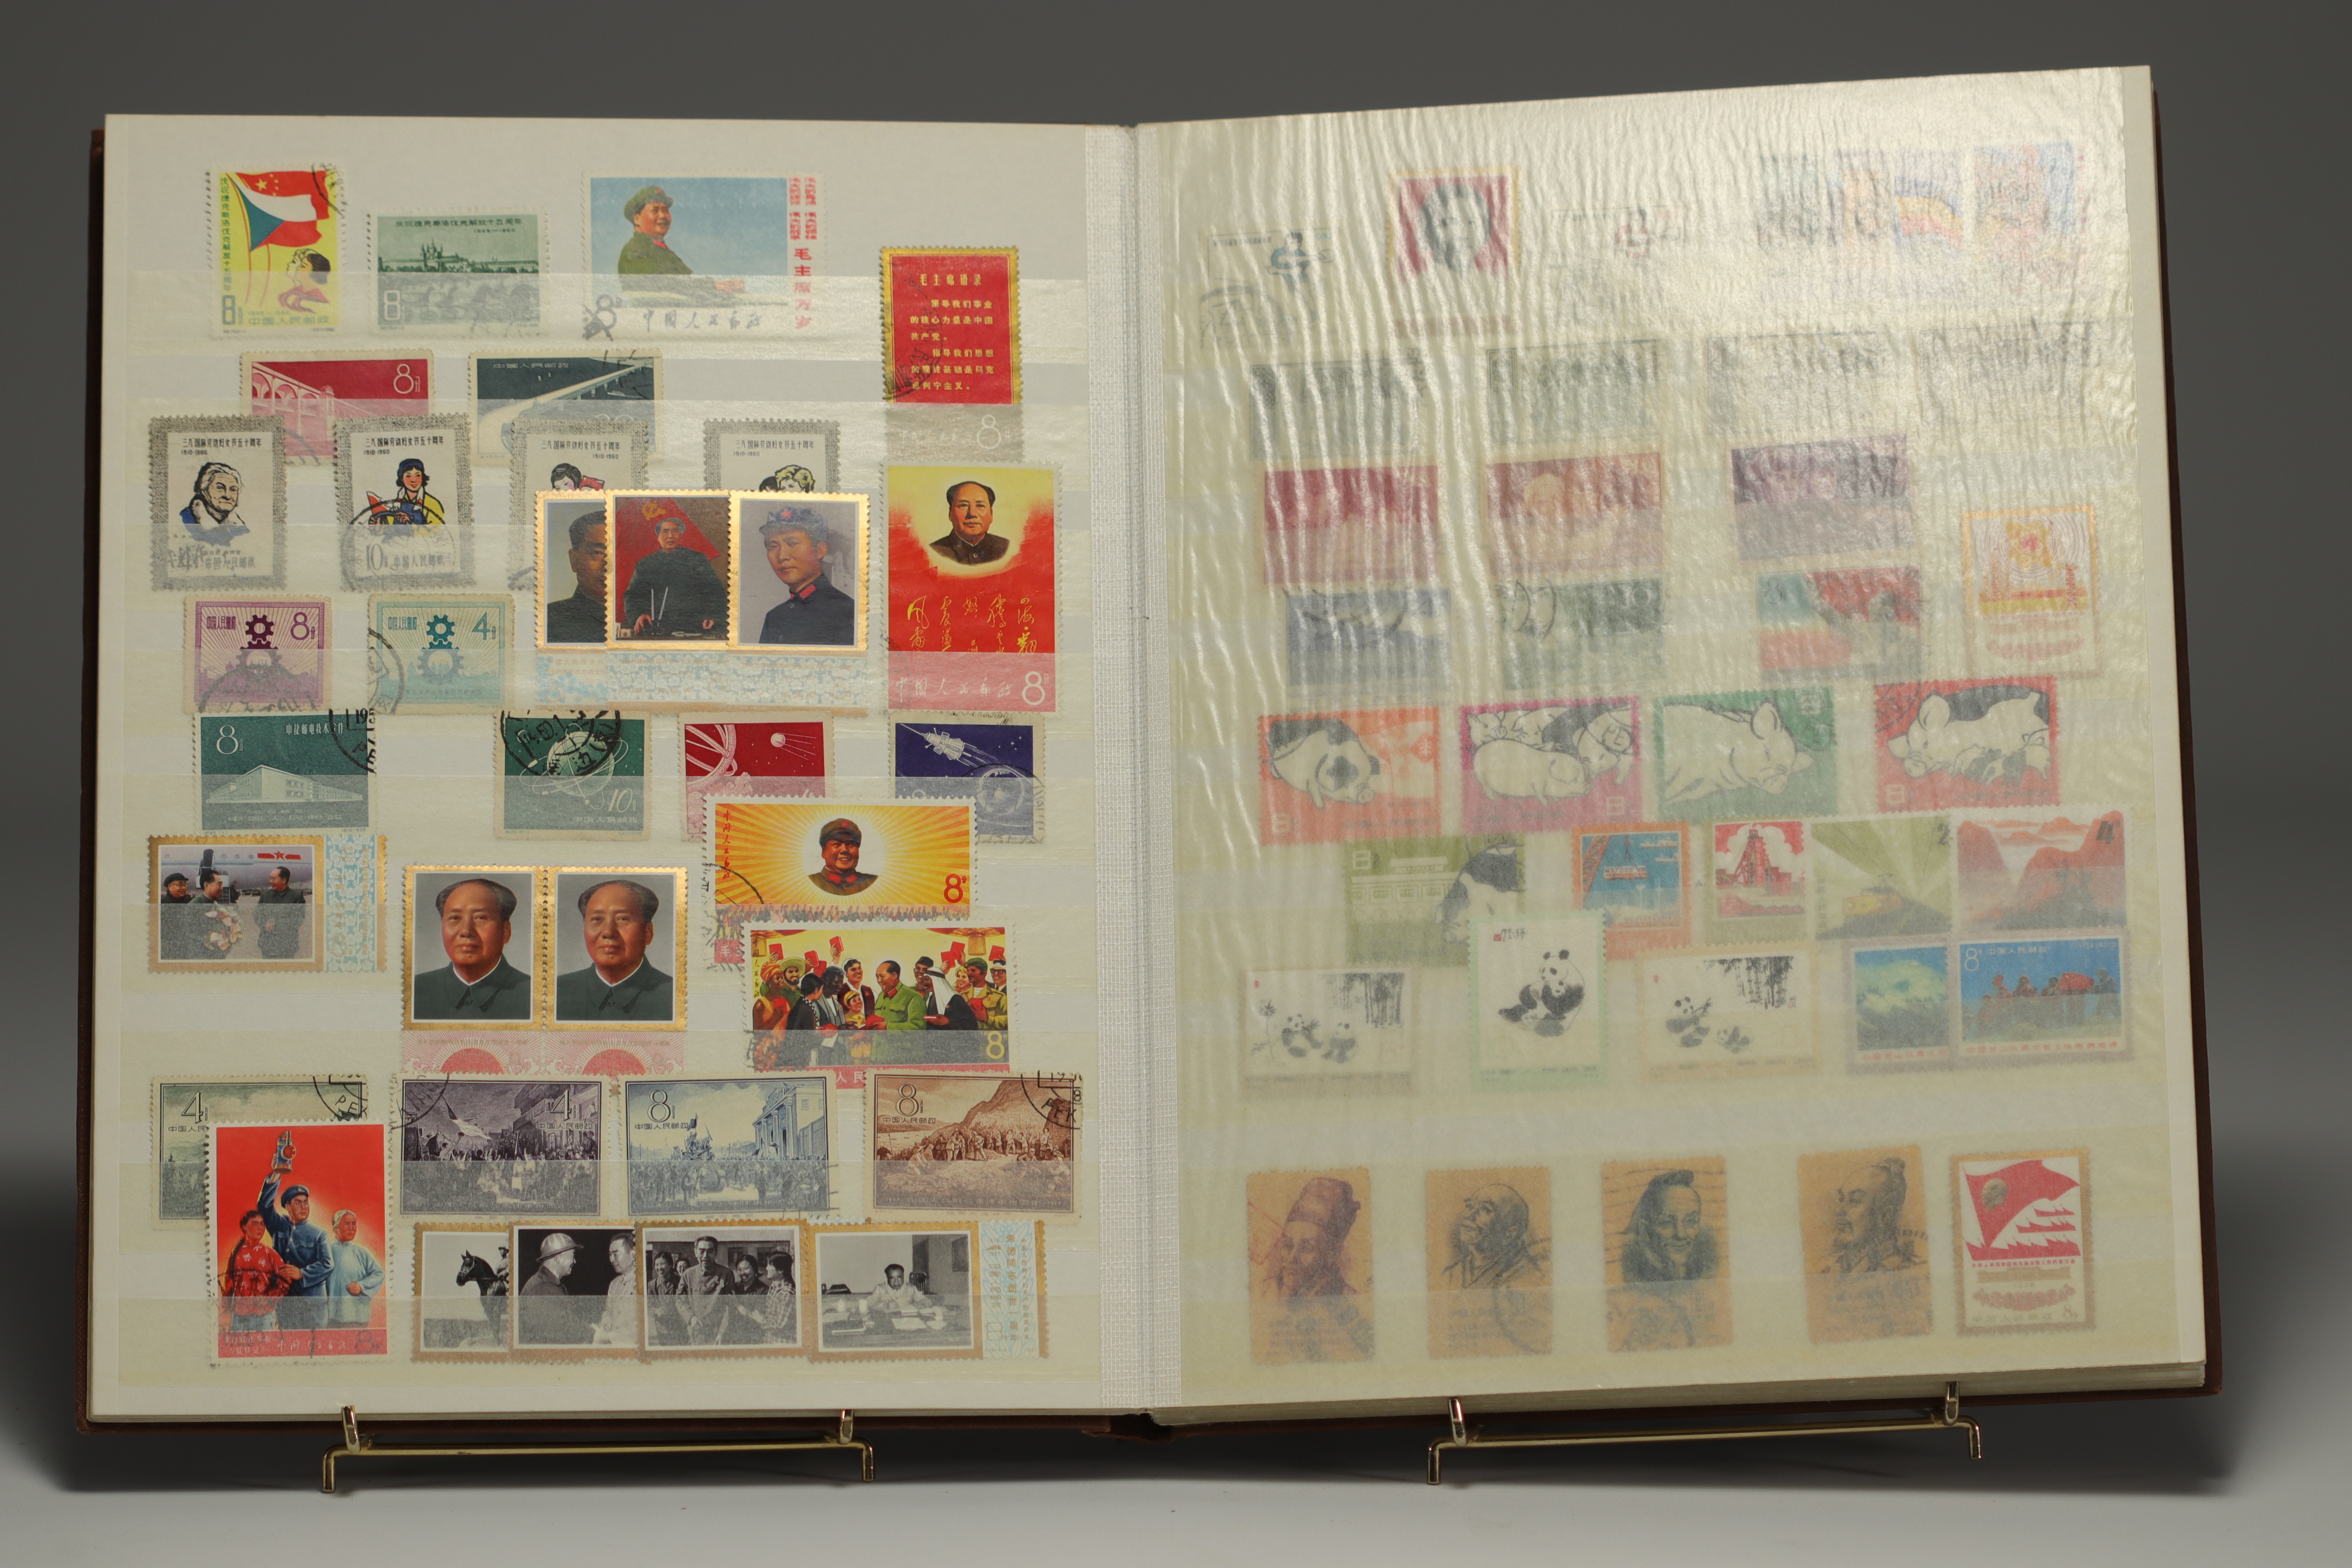 Set of 30 albums of world stamps, China, Japan, Middle East, Europe, etc. (Lot 2) - Image 20 of 22